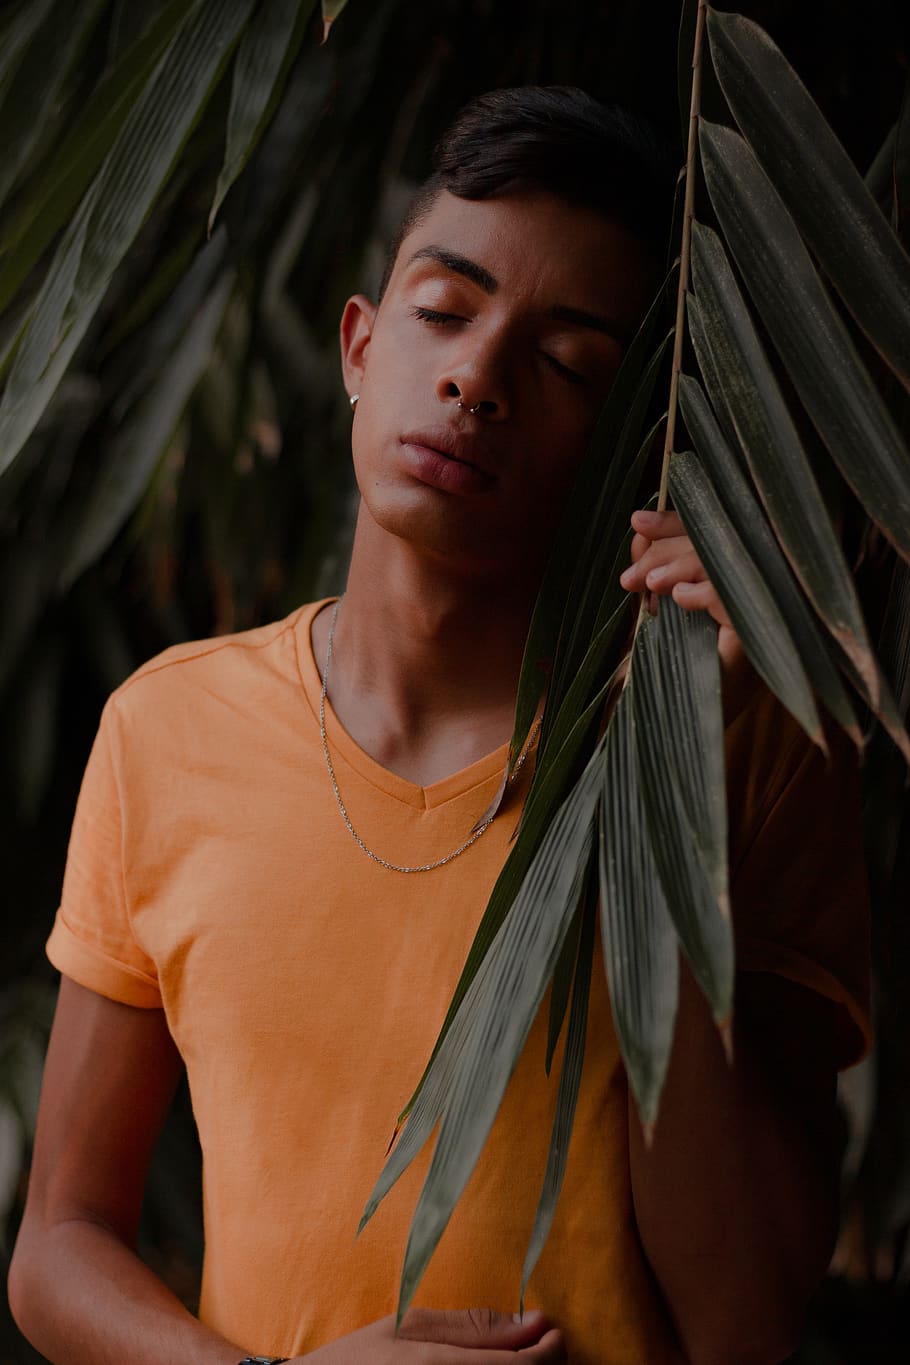 Photo of Boy in Orange V-neck T-shirt Posing Next To Green Leafed Plant With His Eyes Closed